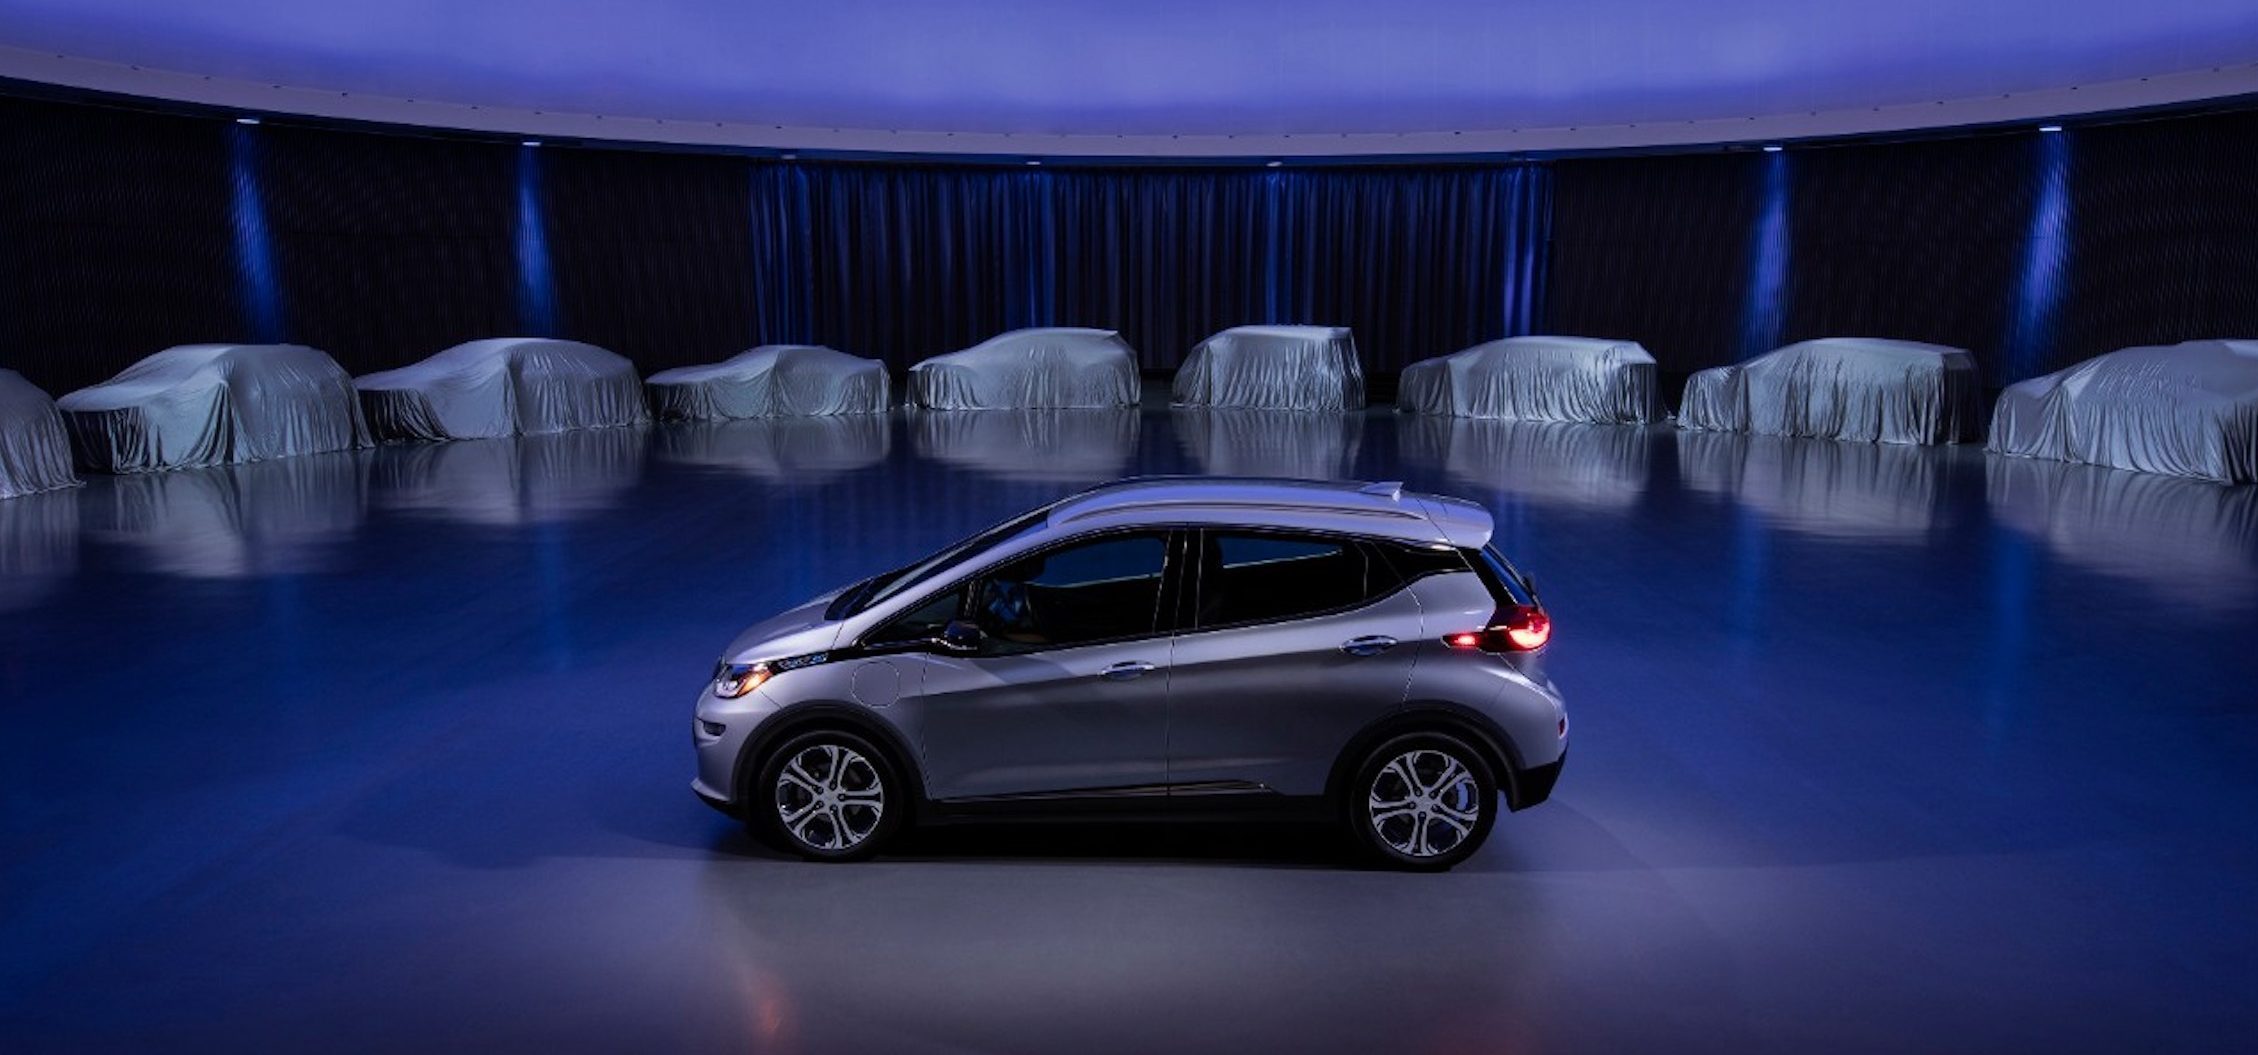 GM promised to introduce 2 new EVs by now, where are they?